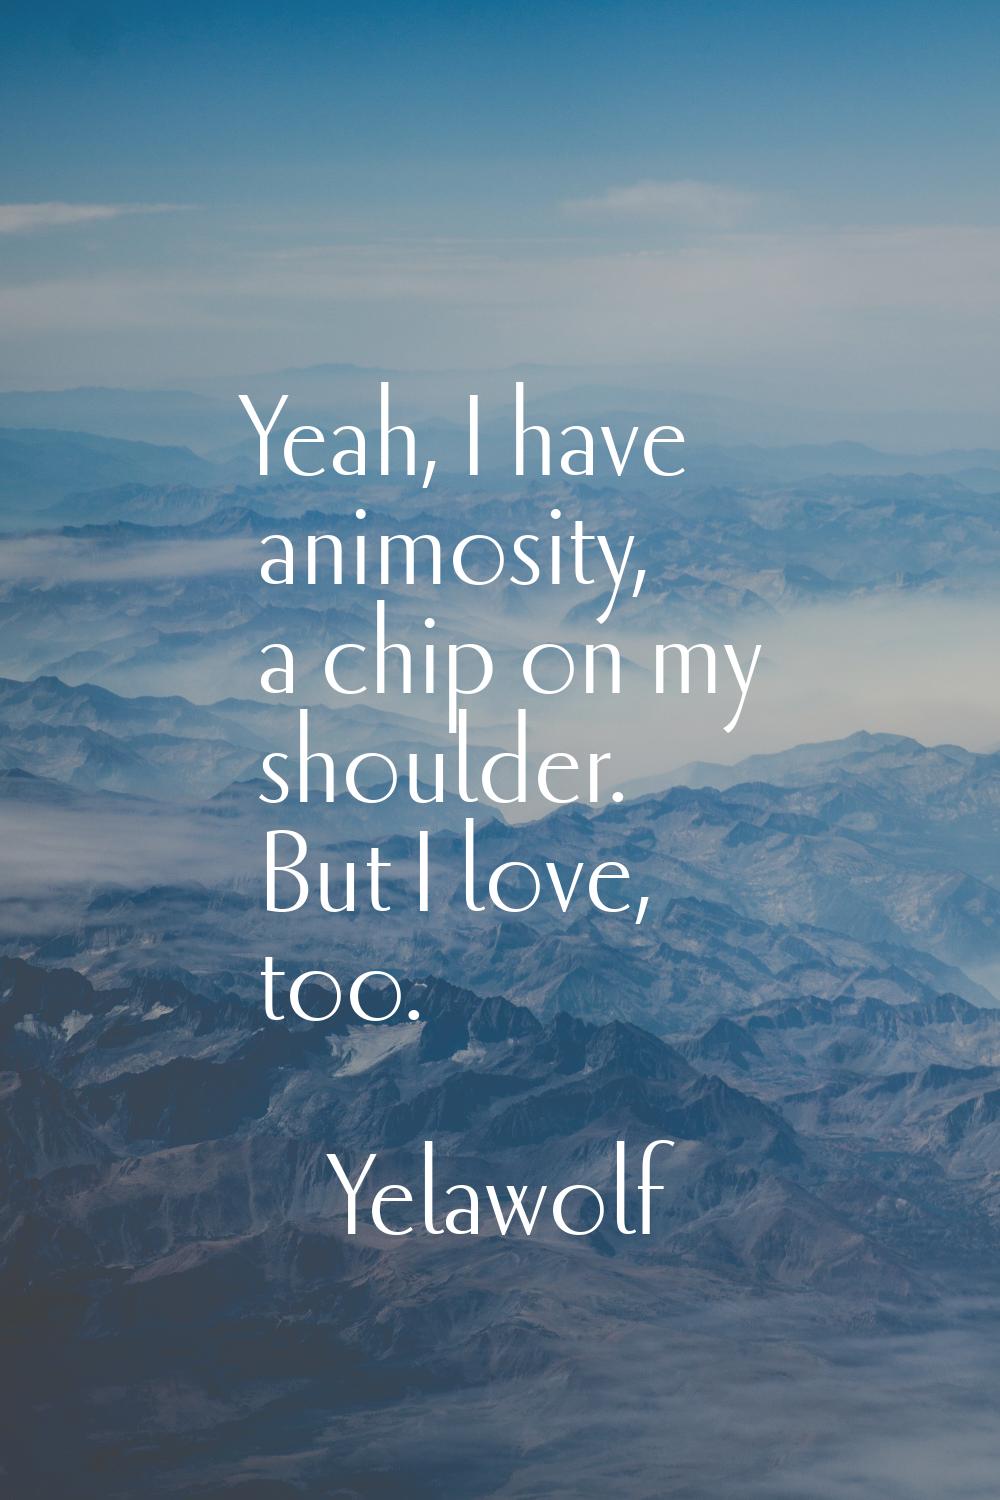 Yeah, I have animosity, a chip on my shoulder. But I love, too.